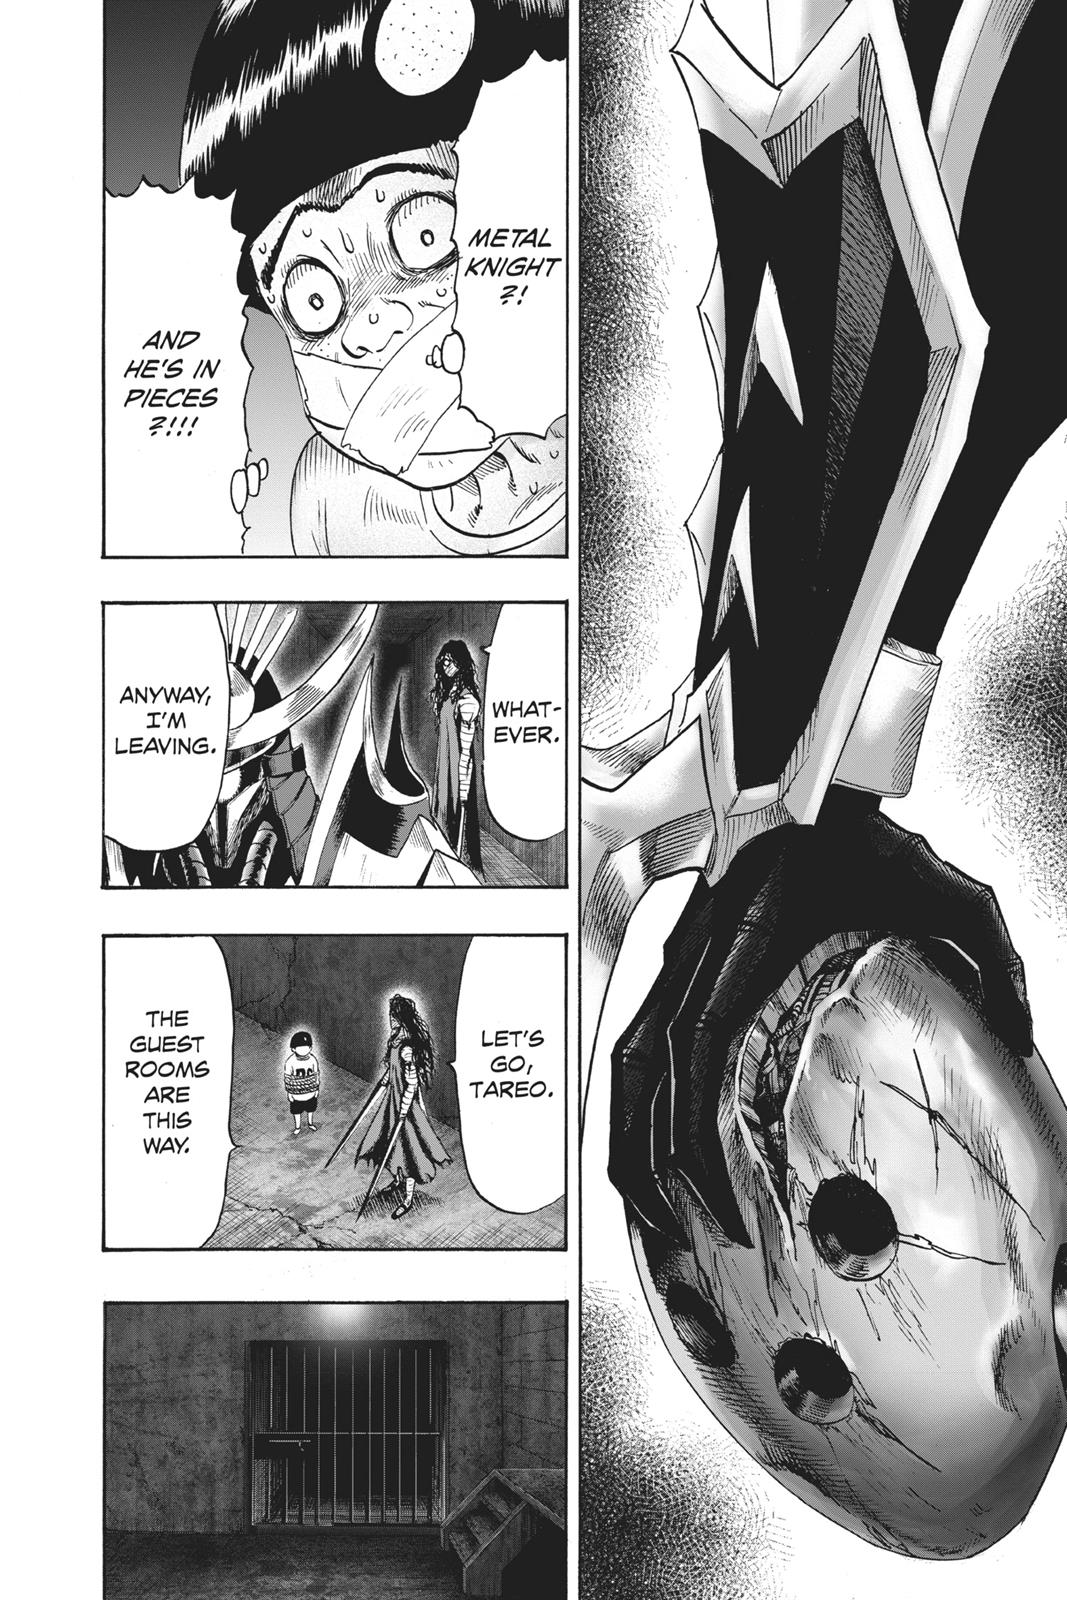 One-Punch Man, Punch 90 image 56